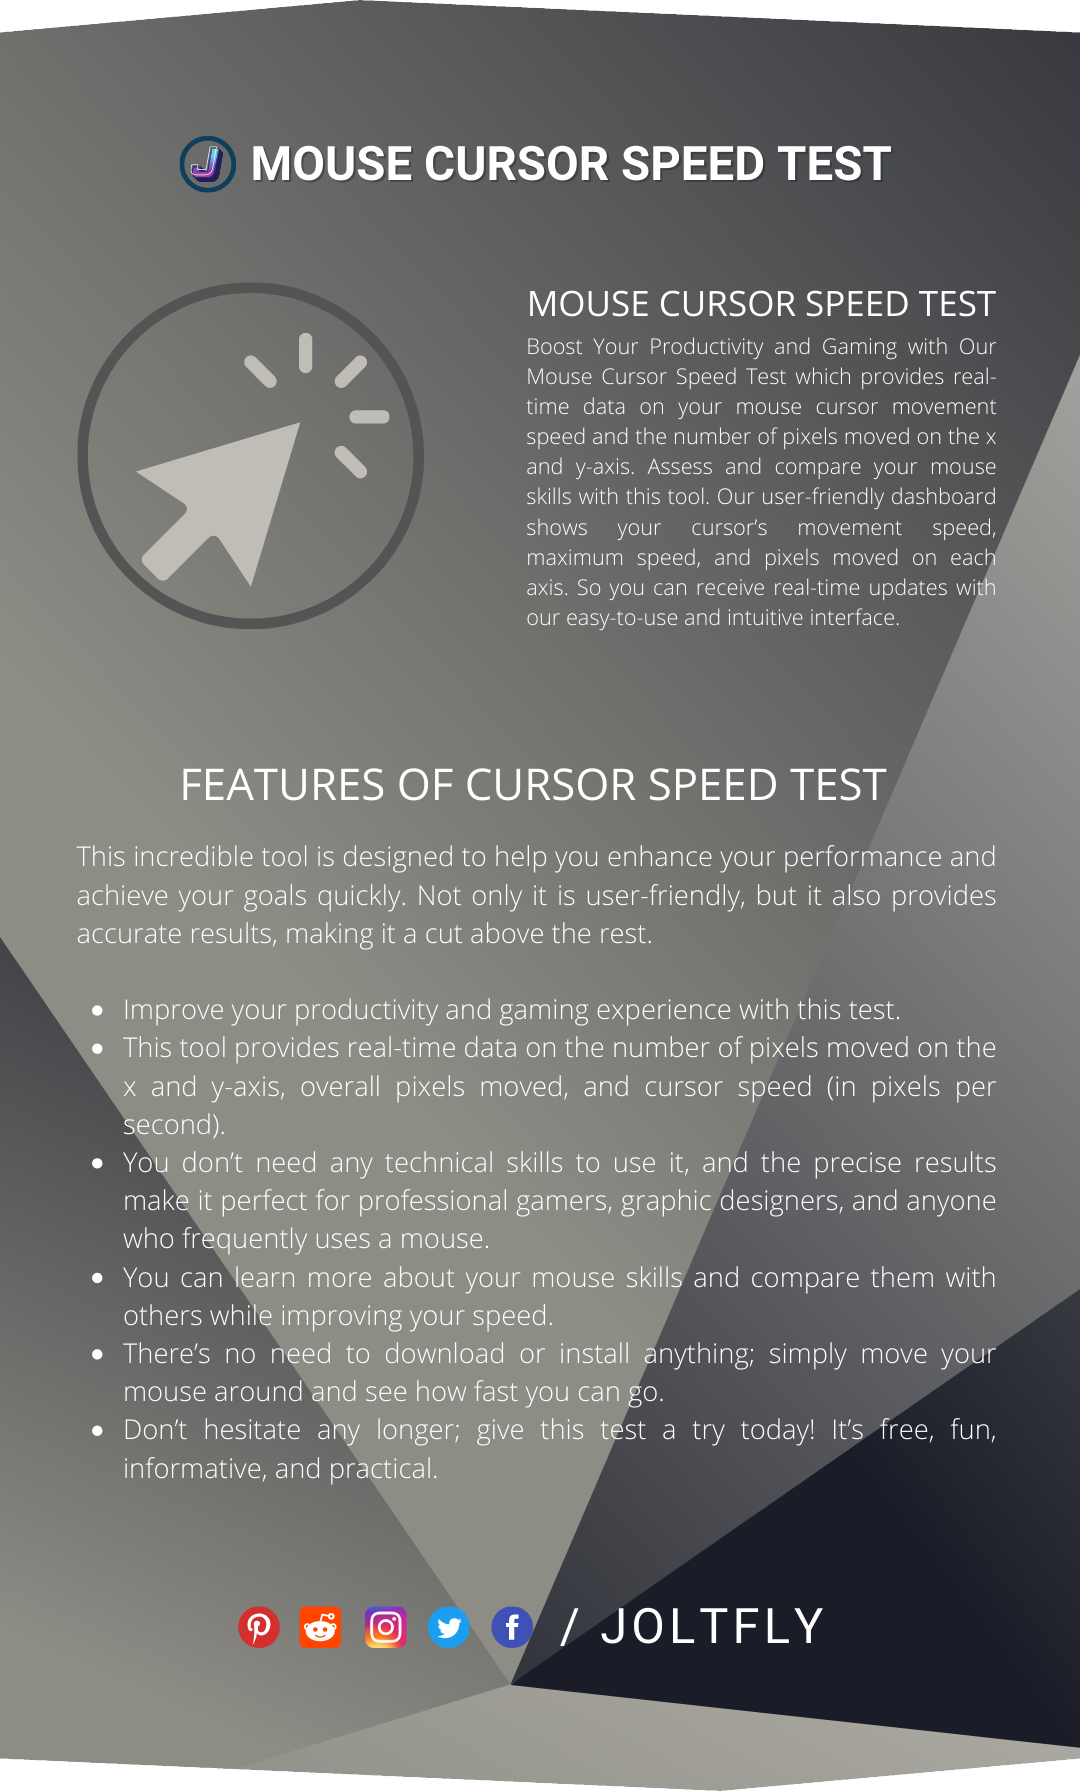 Mouse Cursor Speed Test - Features